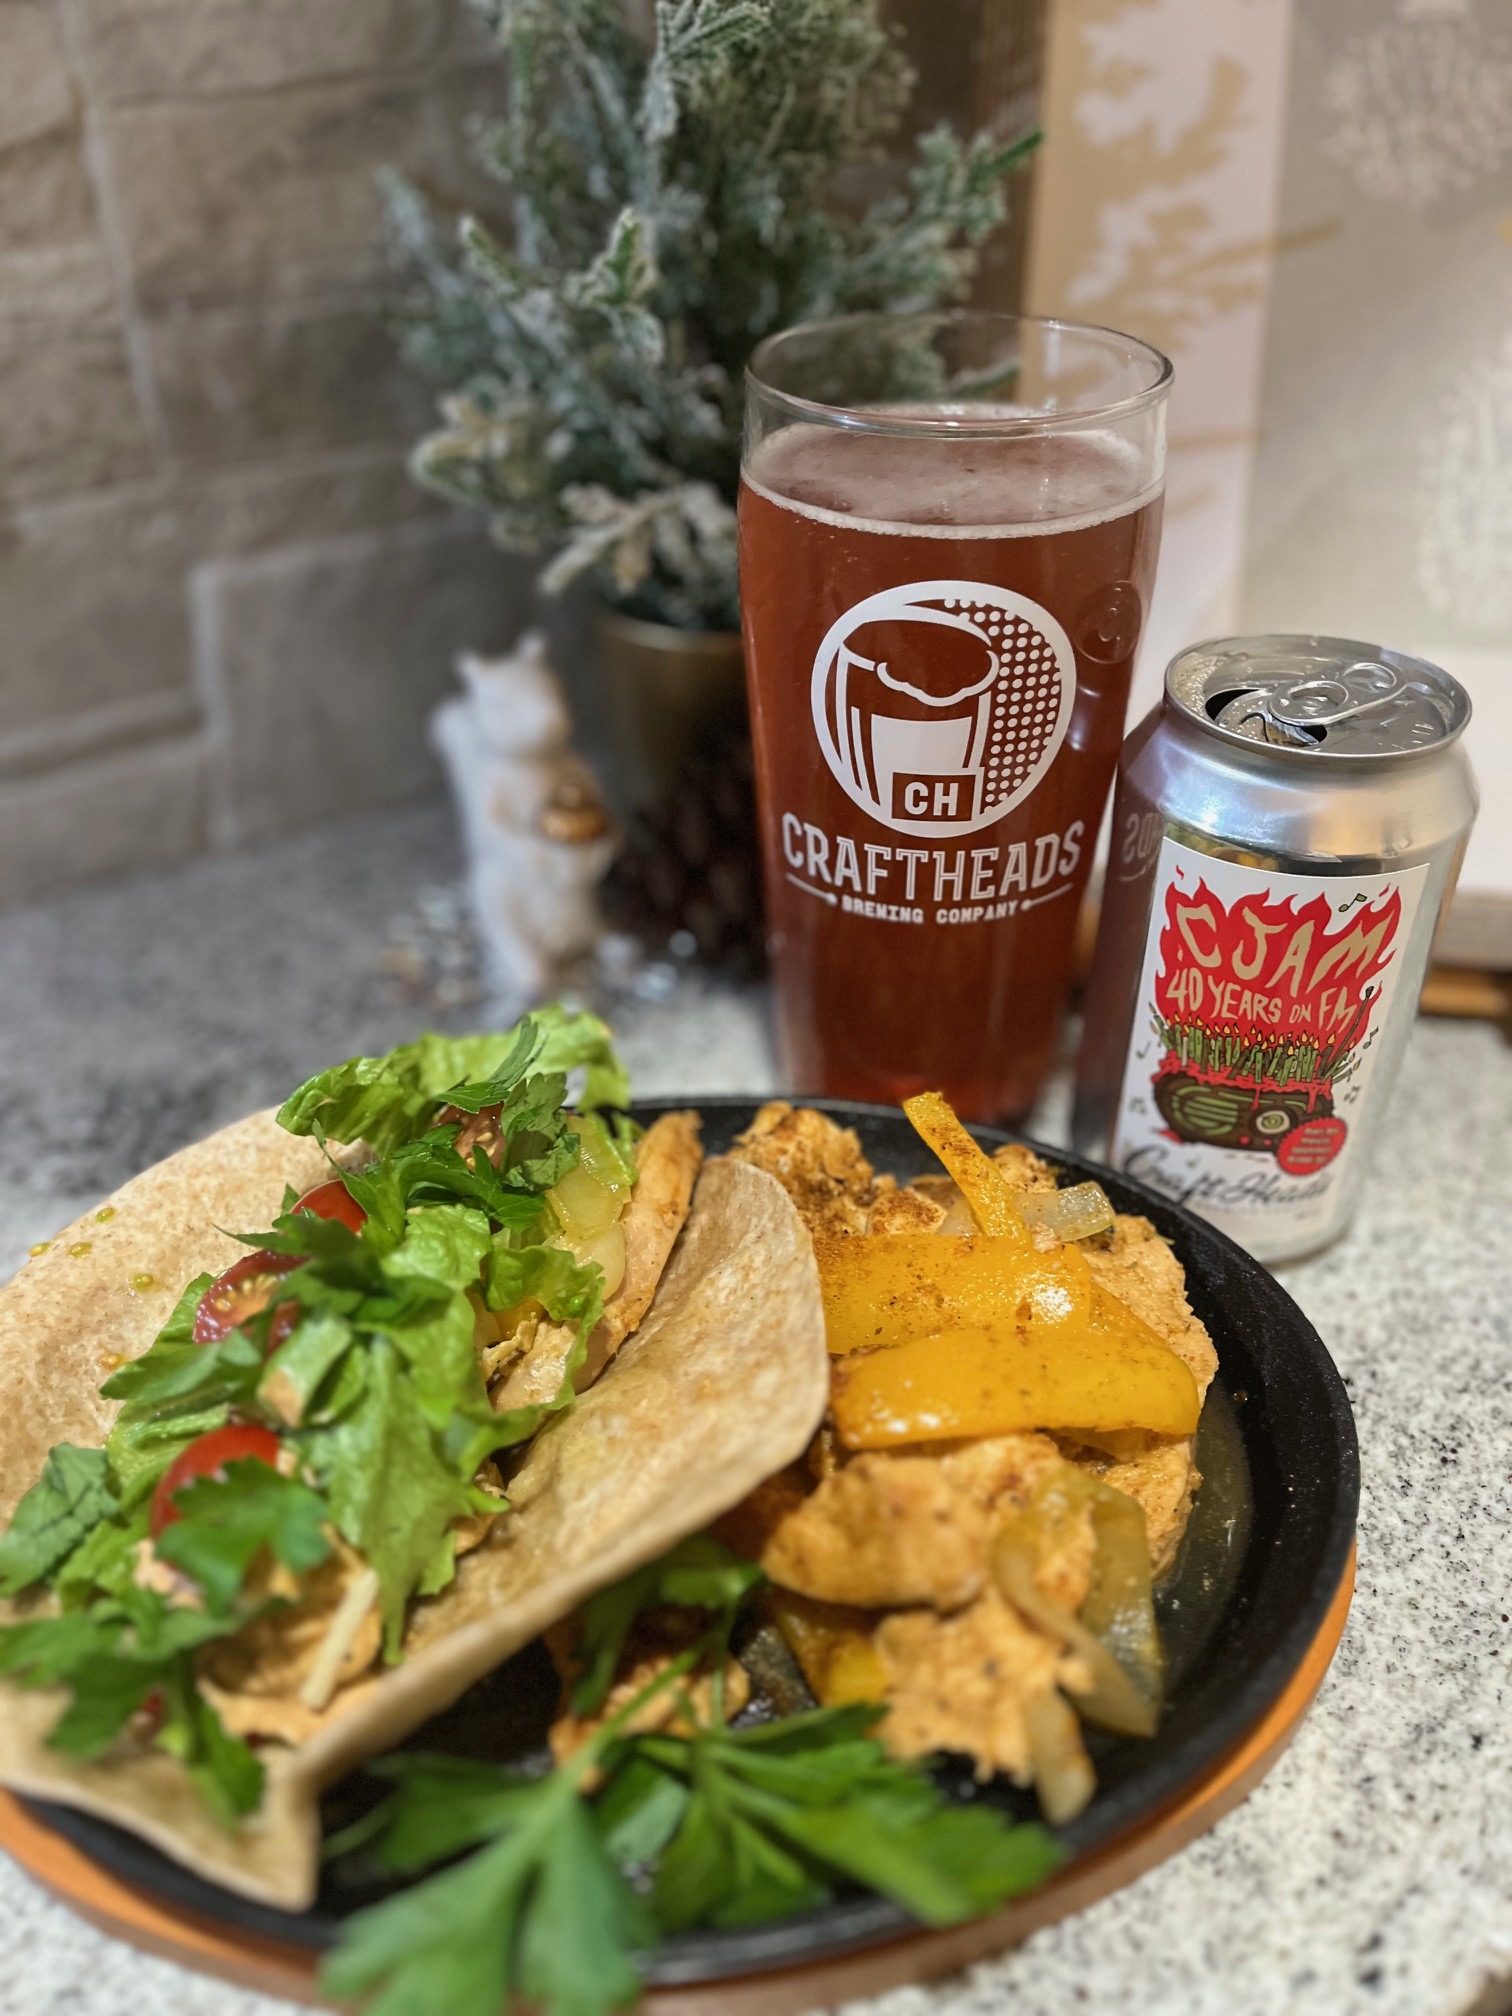 Featured image for “Craftheads CJAM 40 Year Ruby Red Hibiscus Grapefruit Blonde Ale with Chicken Fajitas.”